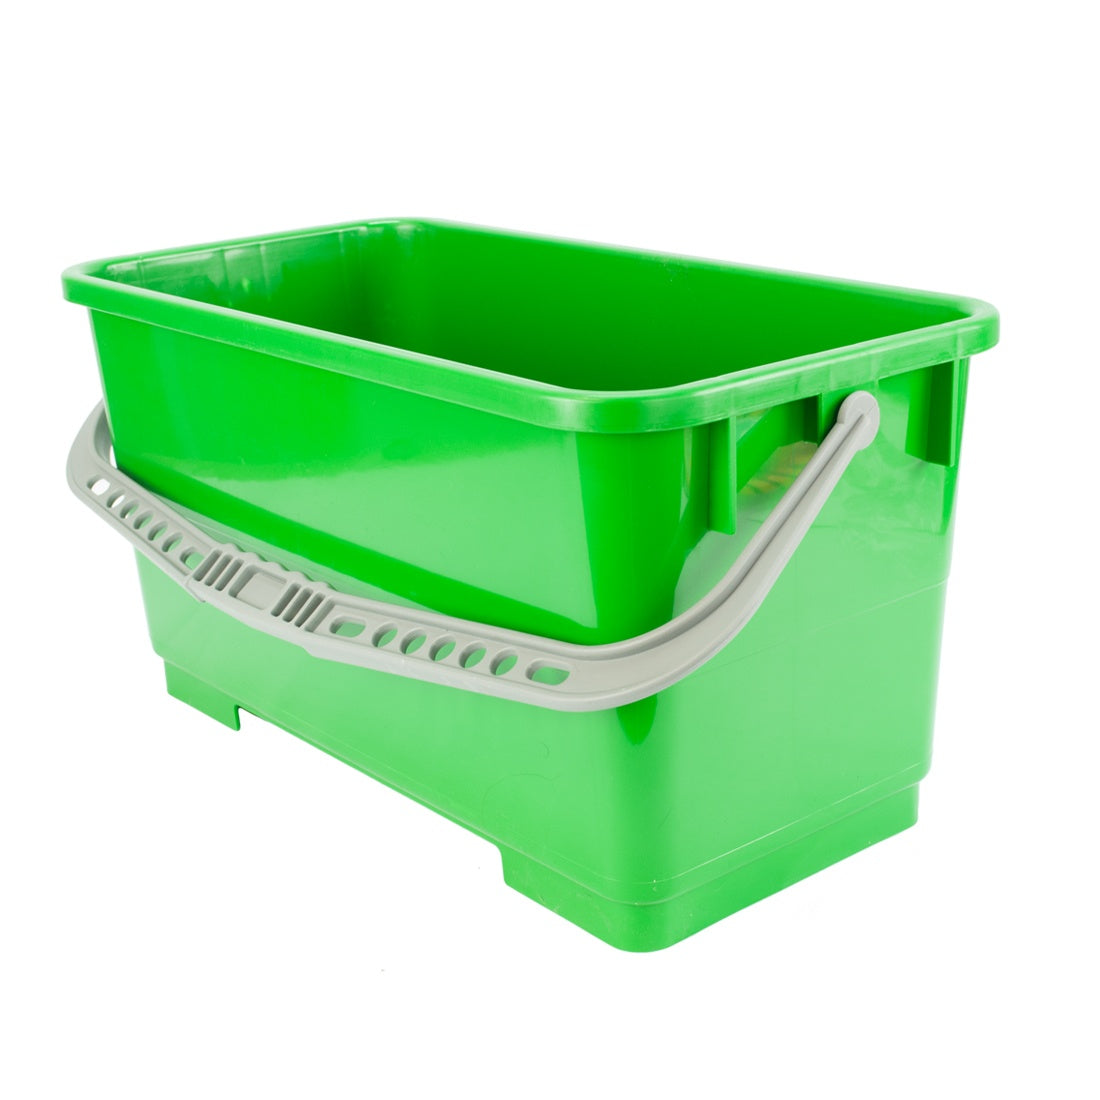 Green 6 Gallon Pulex Bucket with Grey Handle Left Angle View